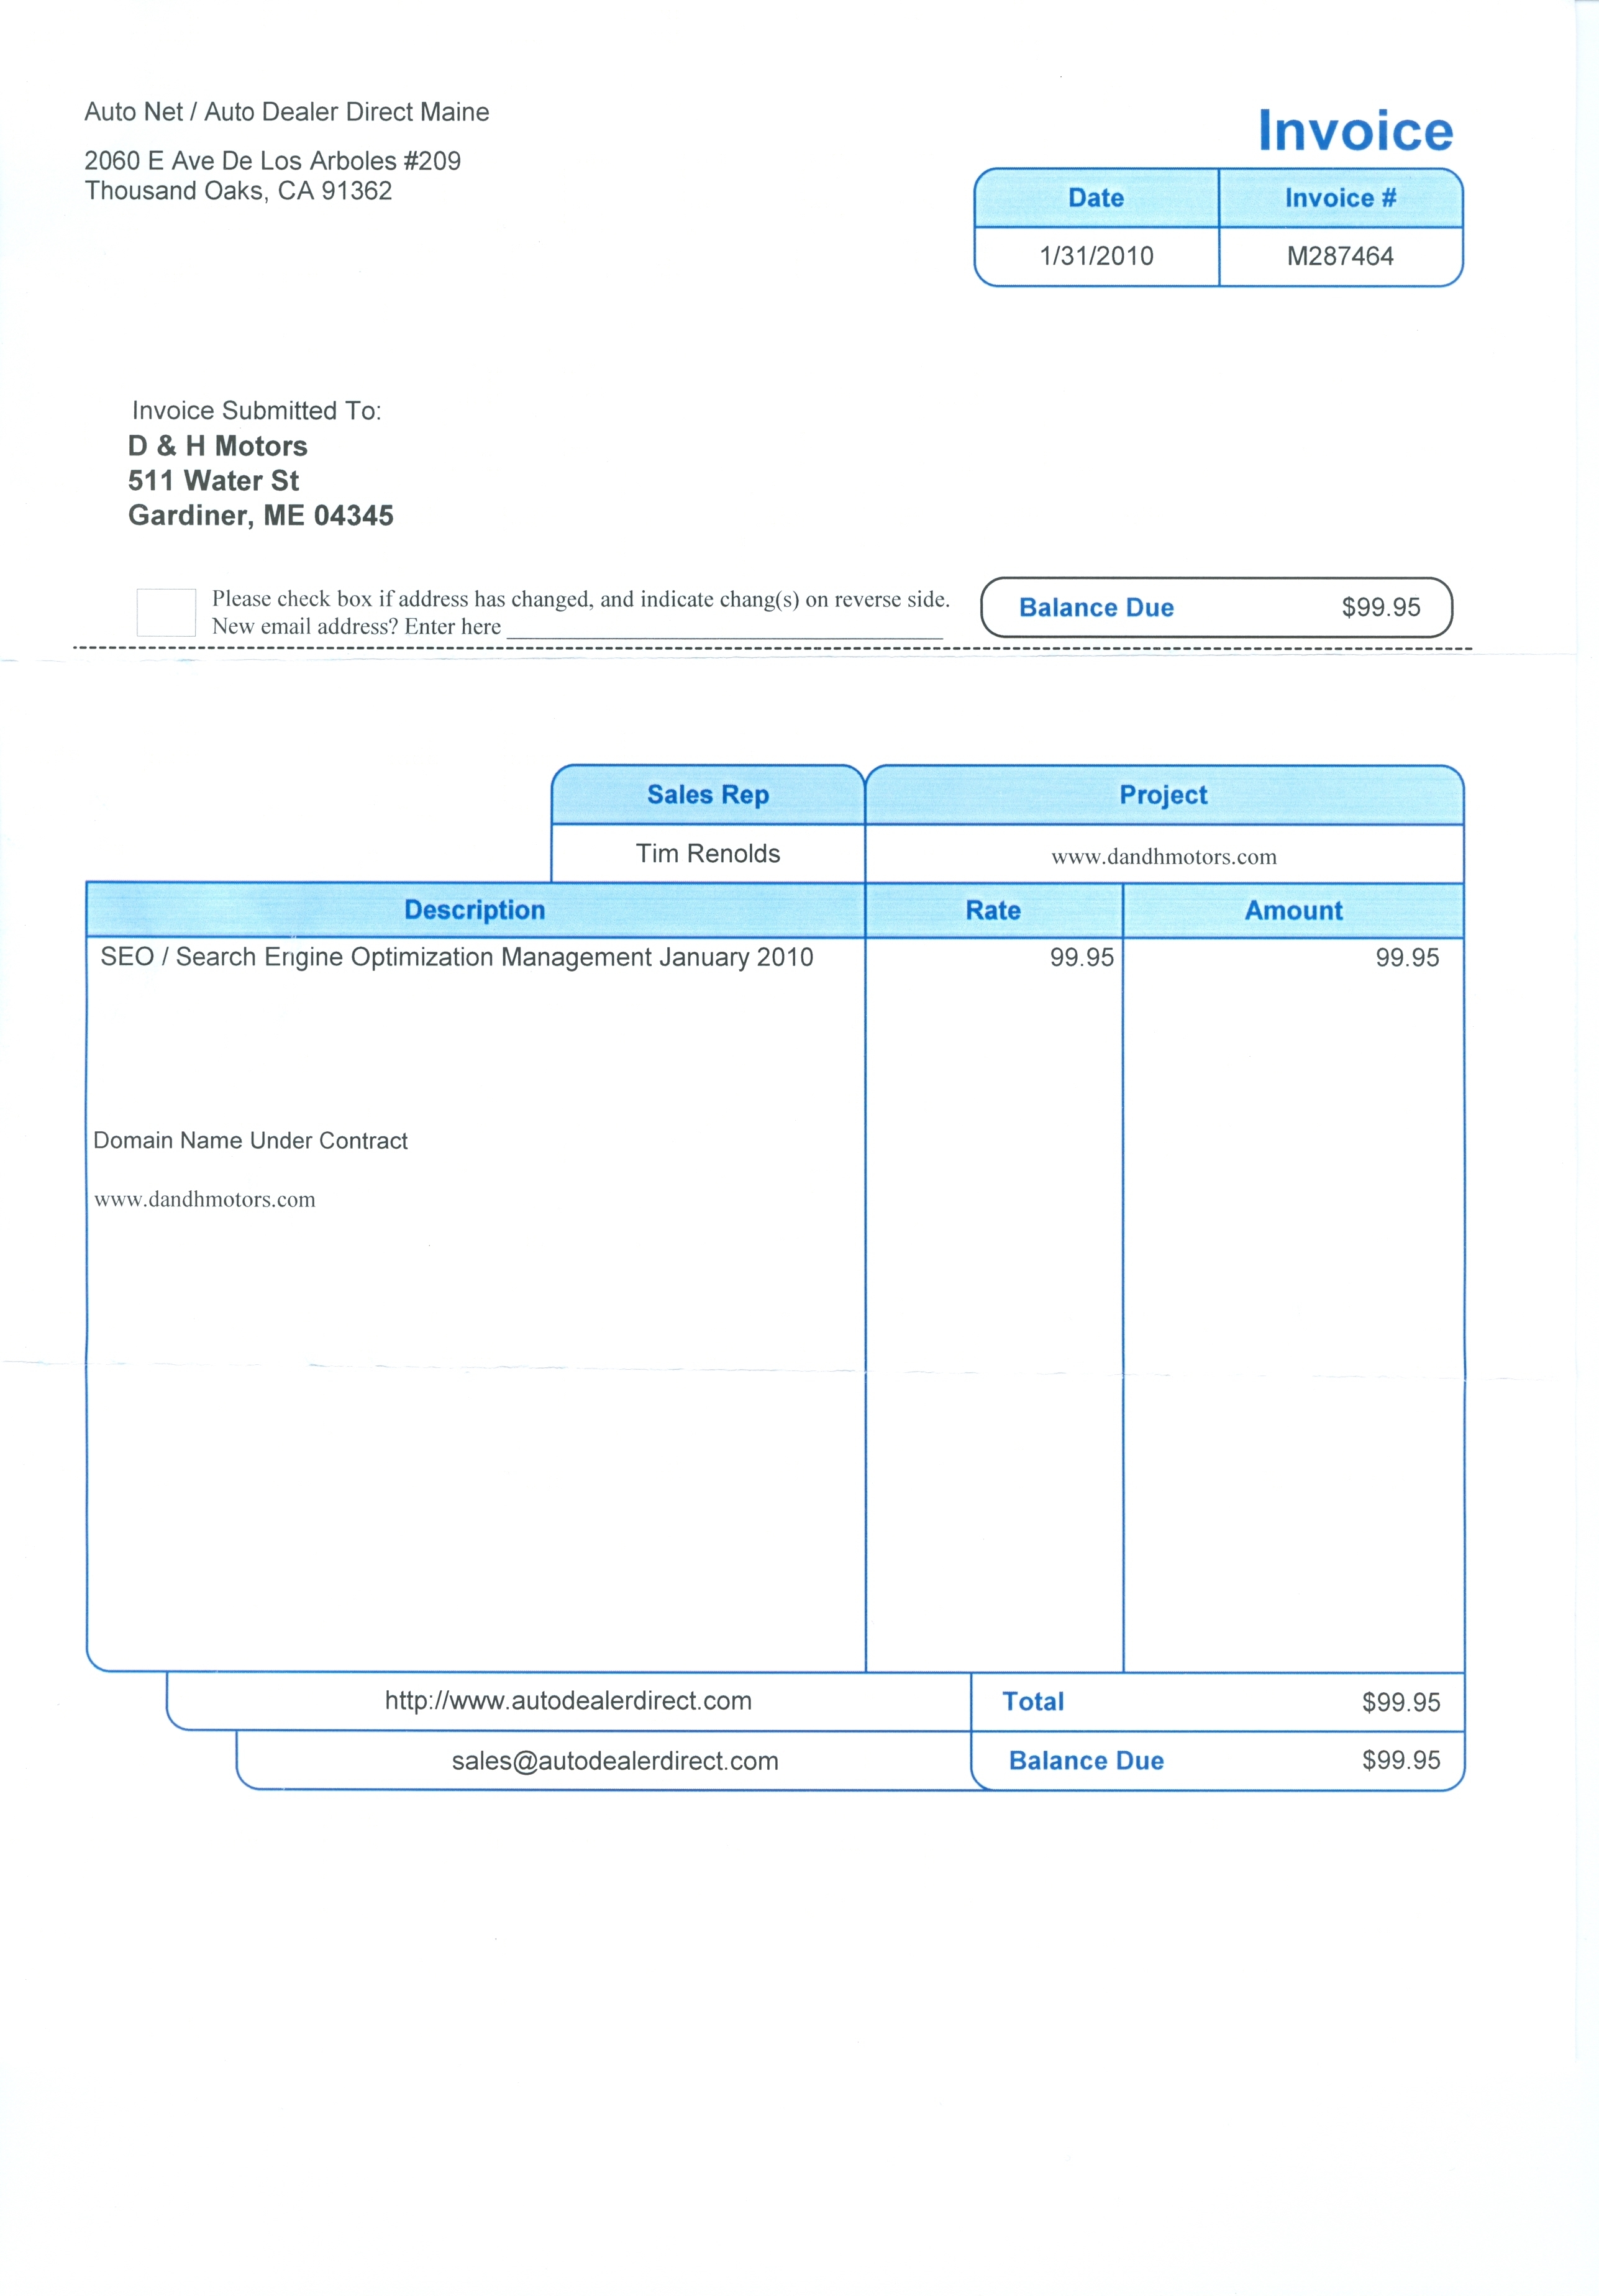 Invoice Cost Of New Cars * Invoice Template Ideas